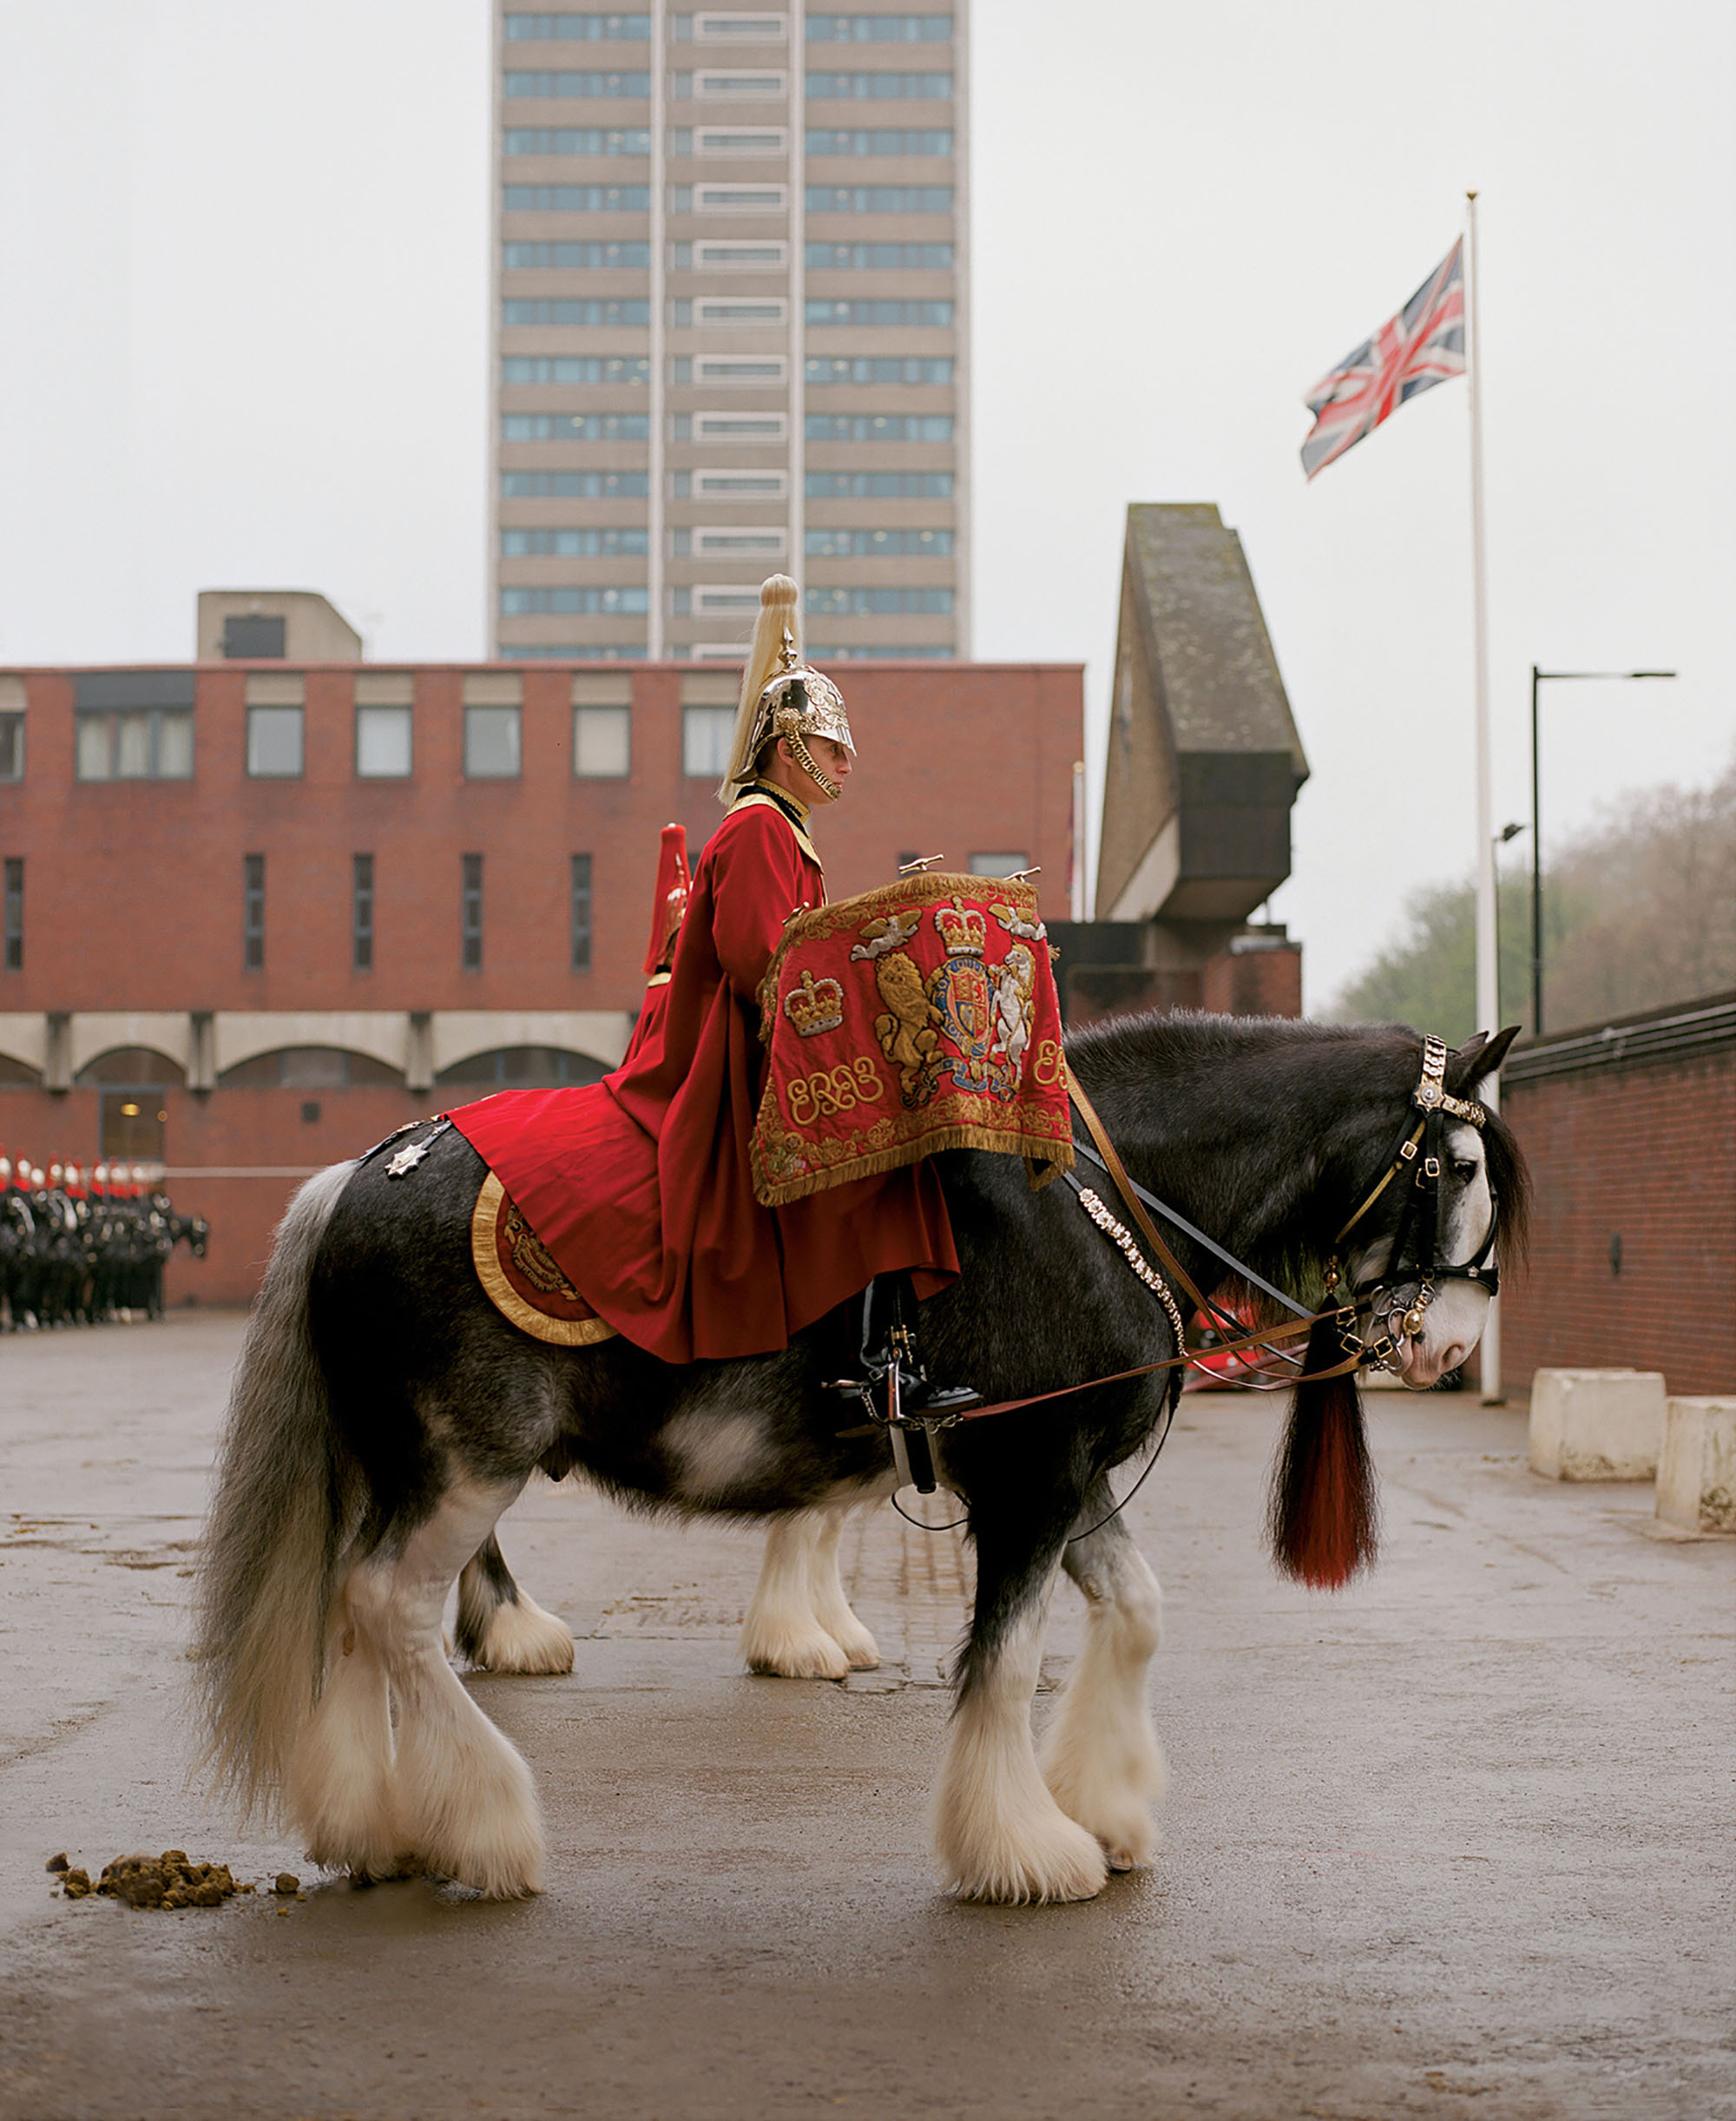 Cavalry - A bandsman of the household cavalry 2019 by Rachel Louise Brown